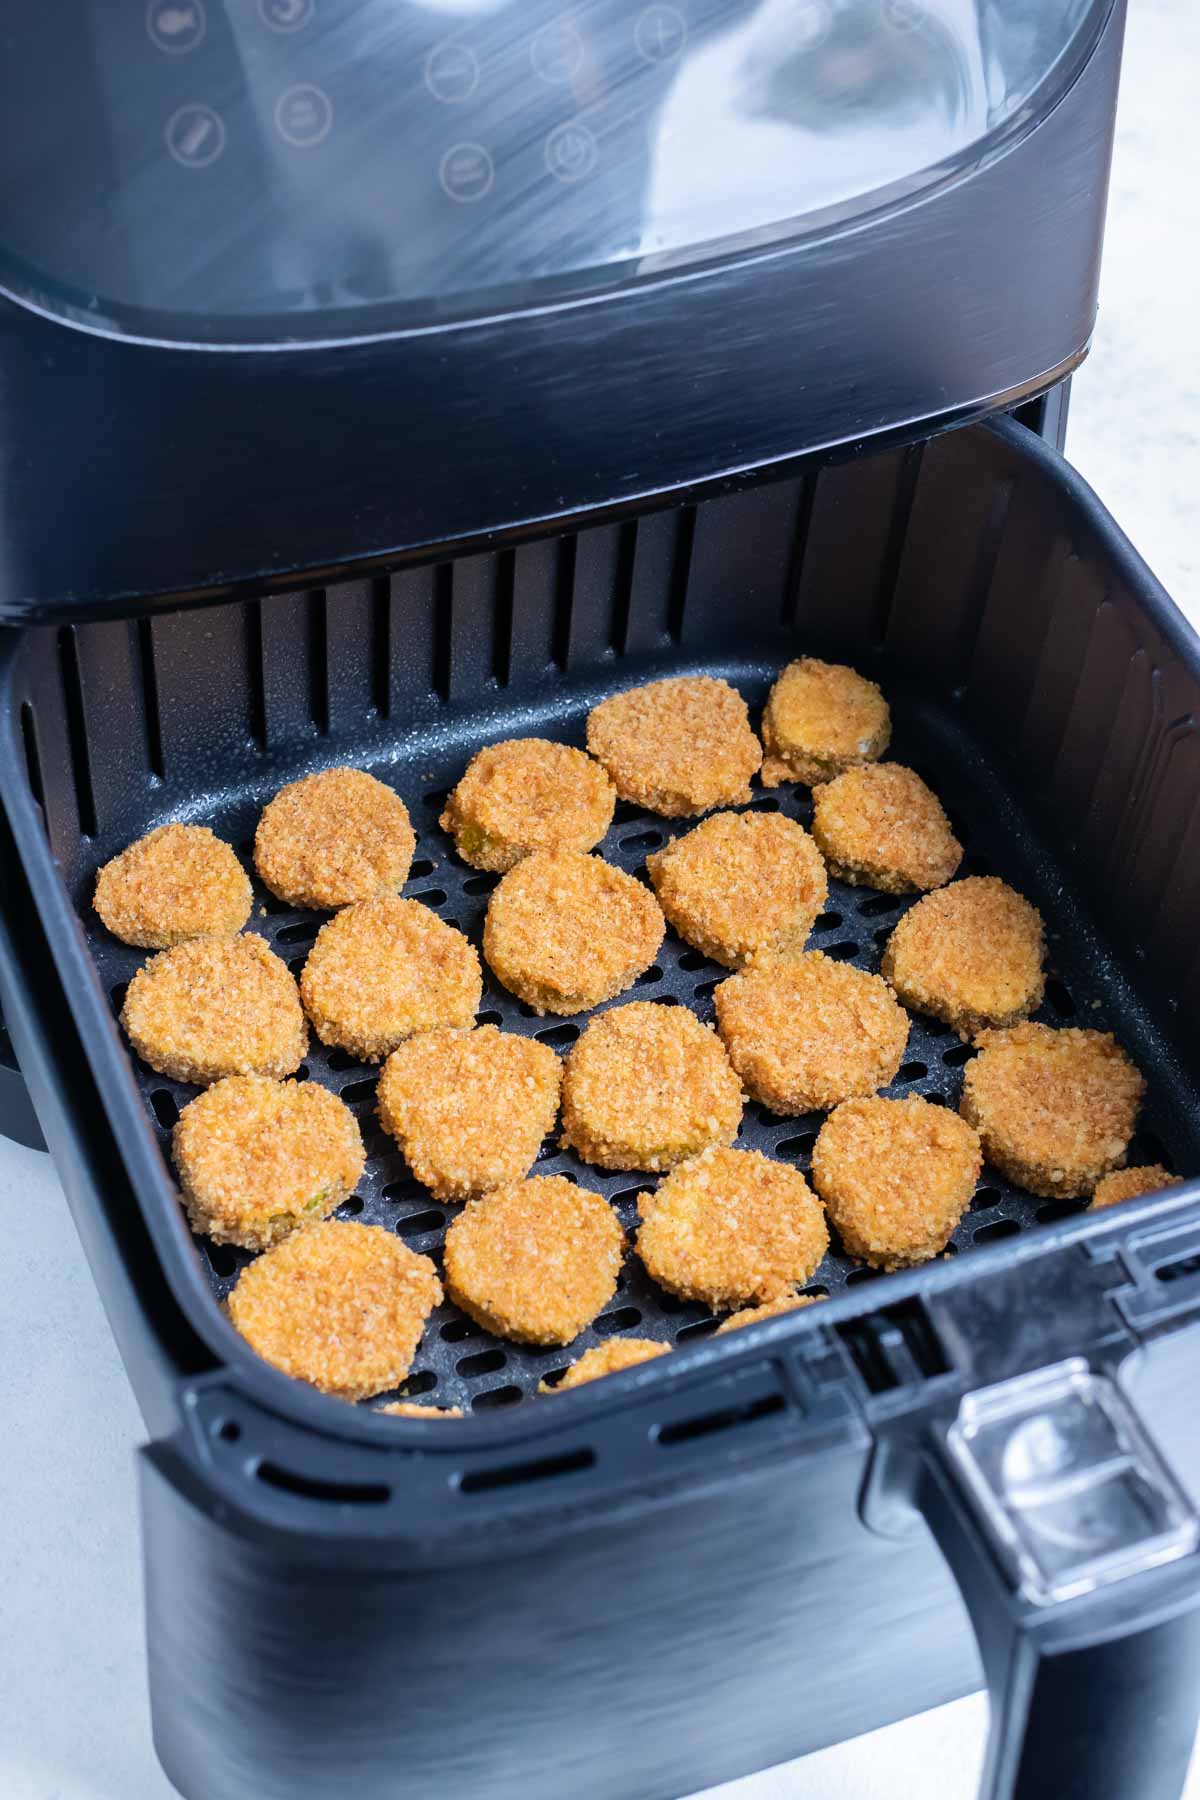 The coated pickles are laid in a single layer in the air fryer.